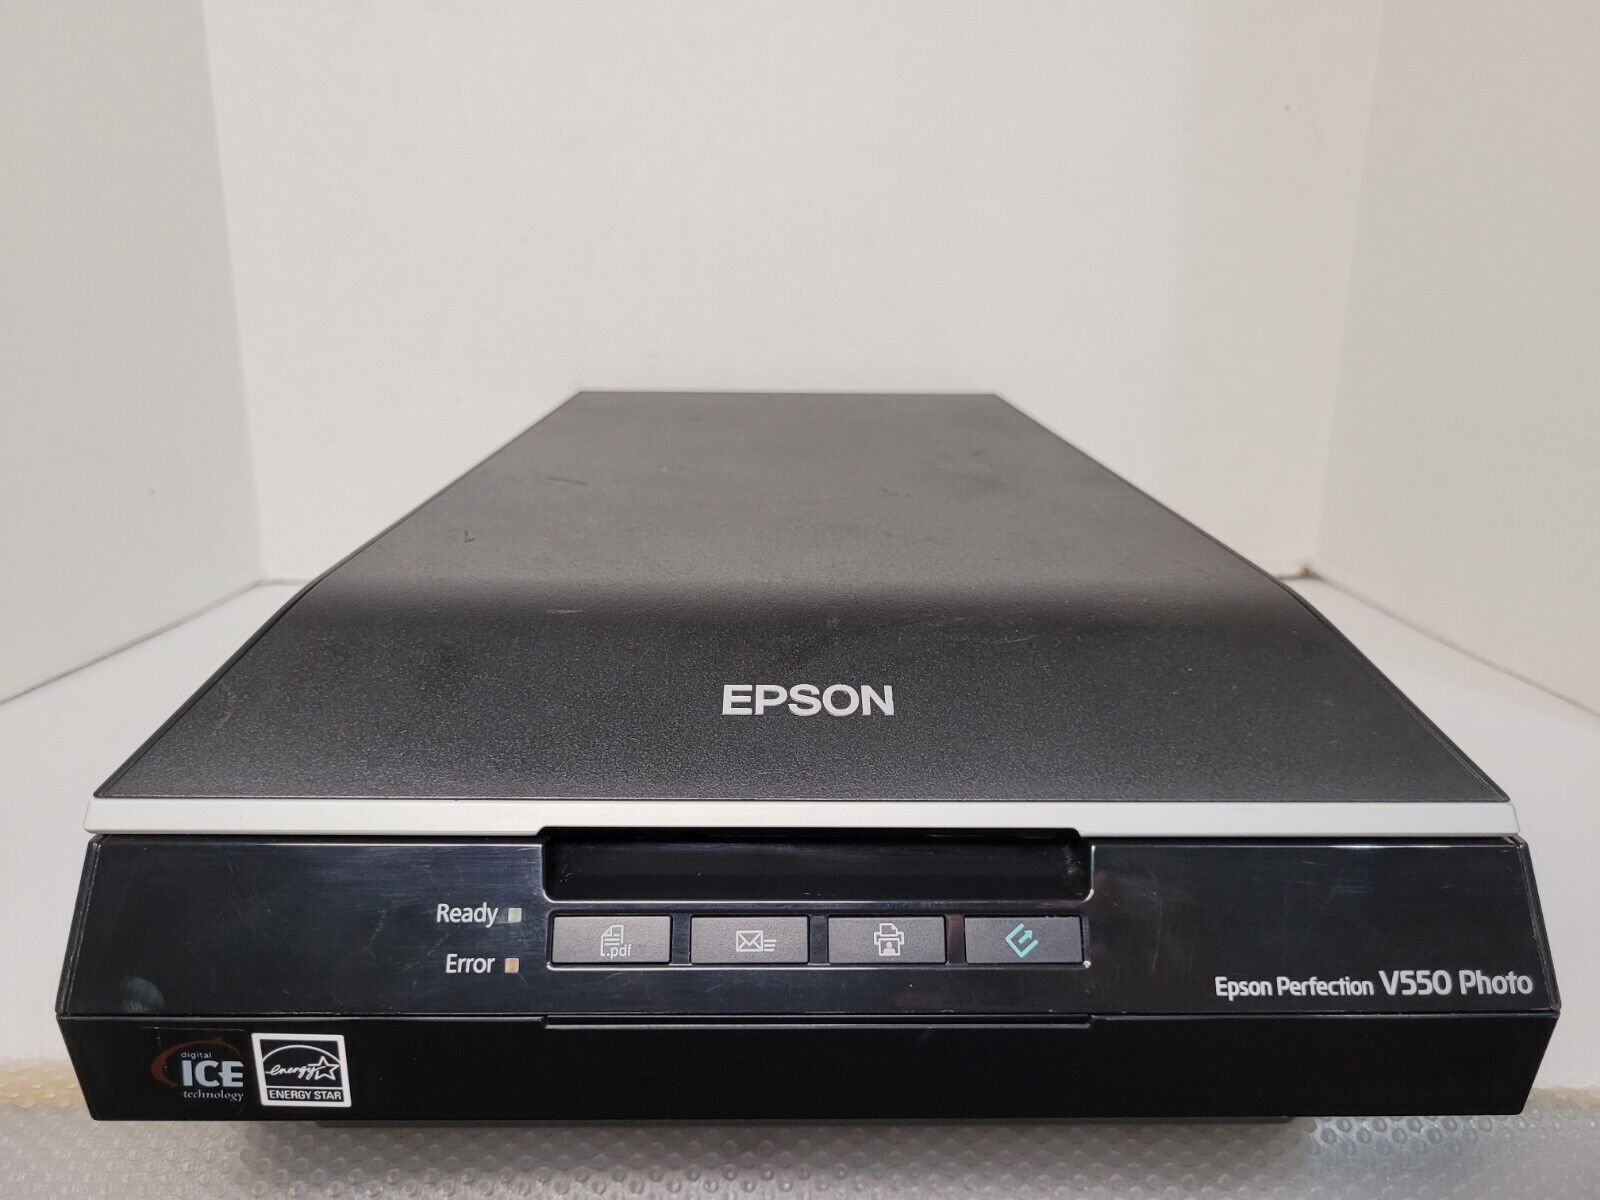 Epson Perfection V550 Photo Color Scanner 6400 dpi - Black / No power Cord /Read